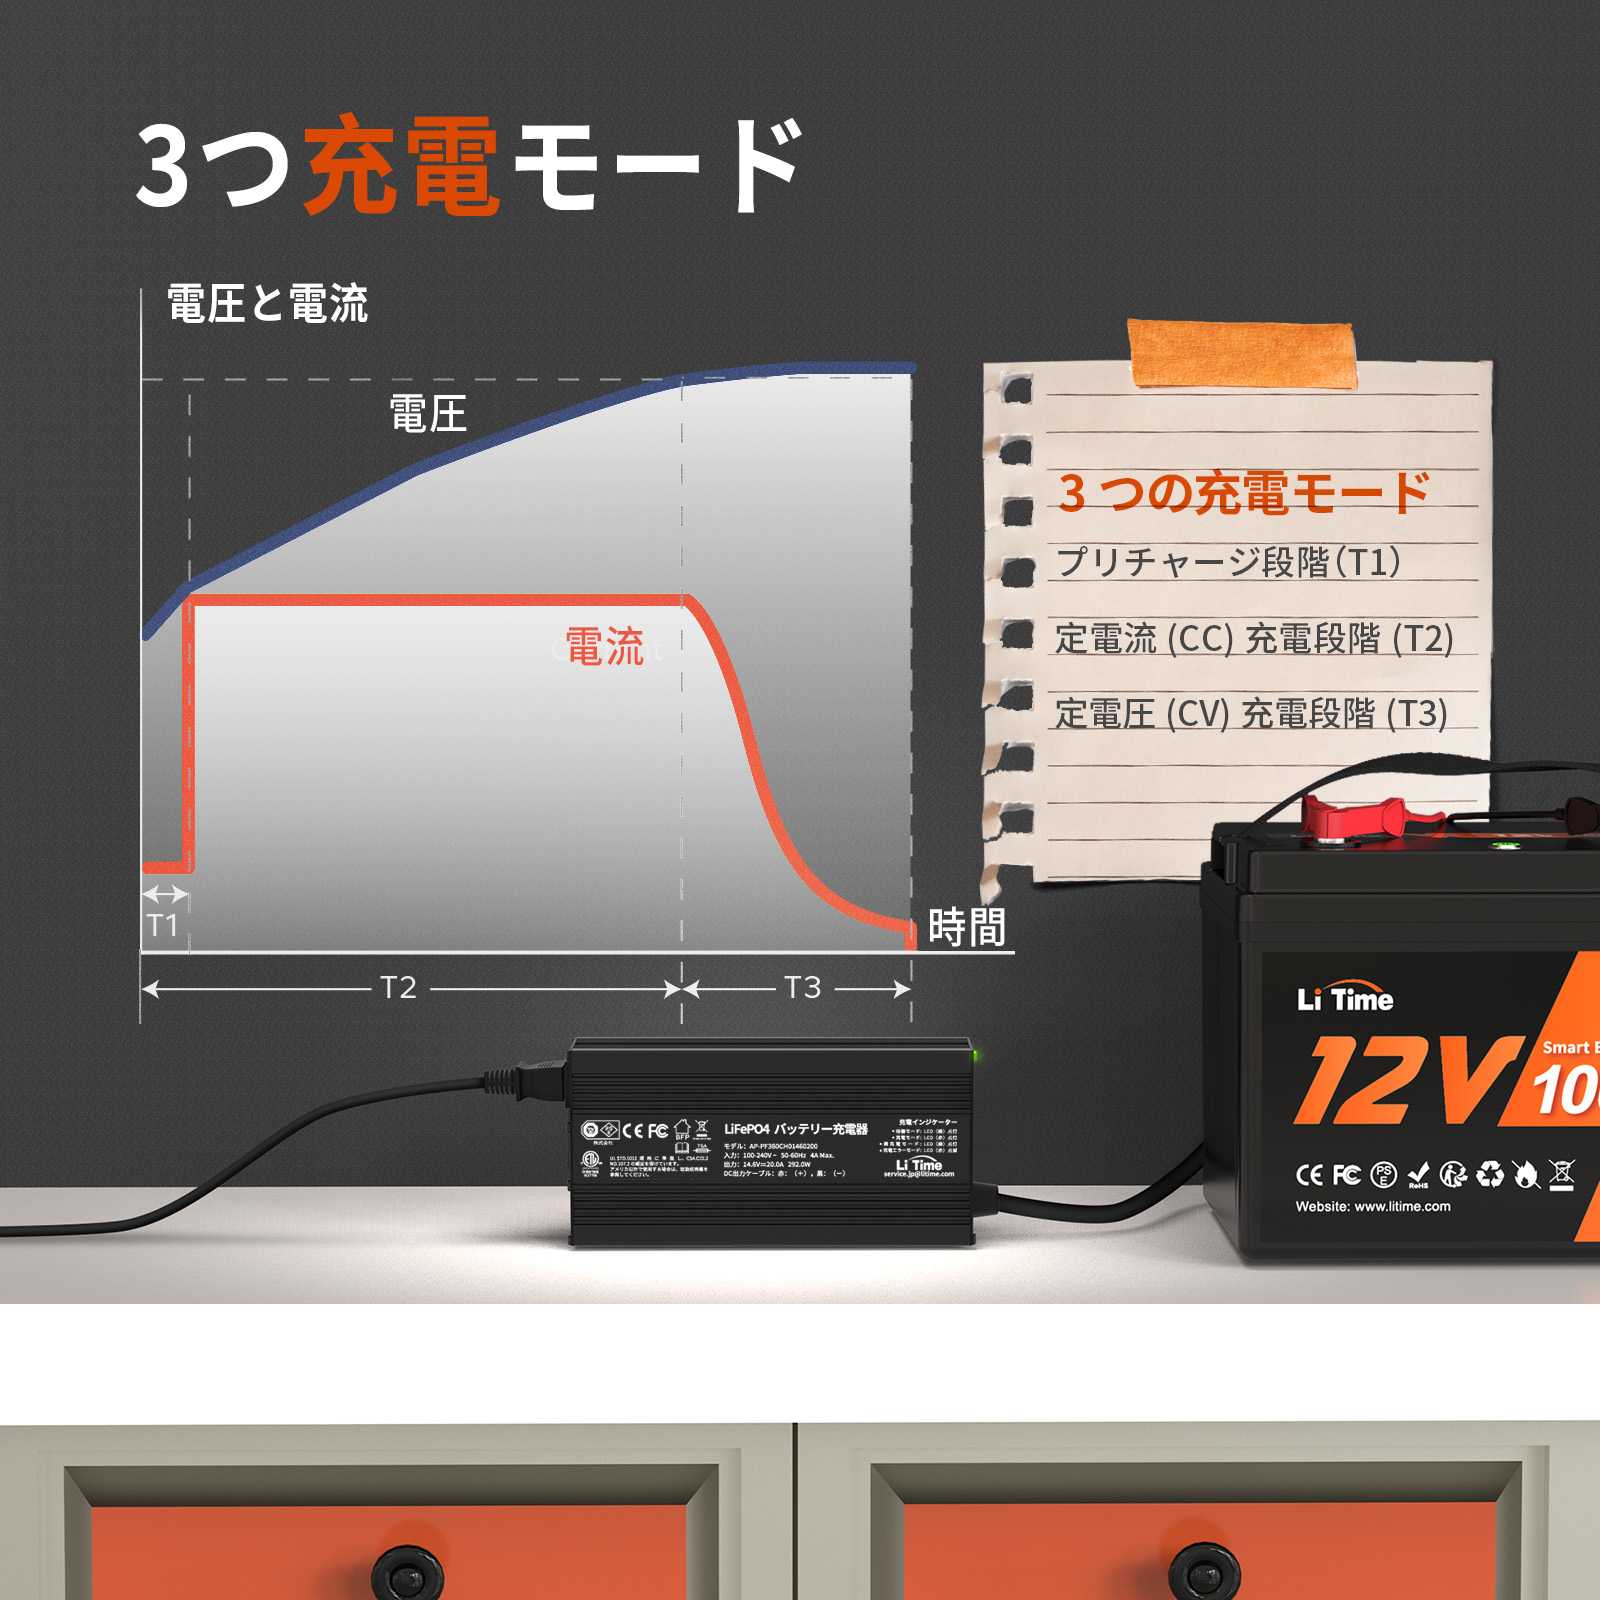 LiTime「Ampere Time 」 14.6V 20A リン酸鉄リチウムバッテリー専用・速い充電器   12Vバッテリー適用 ampere time